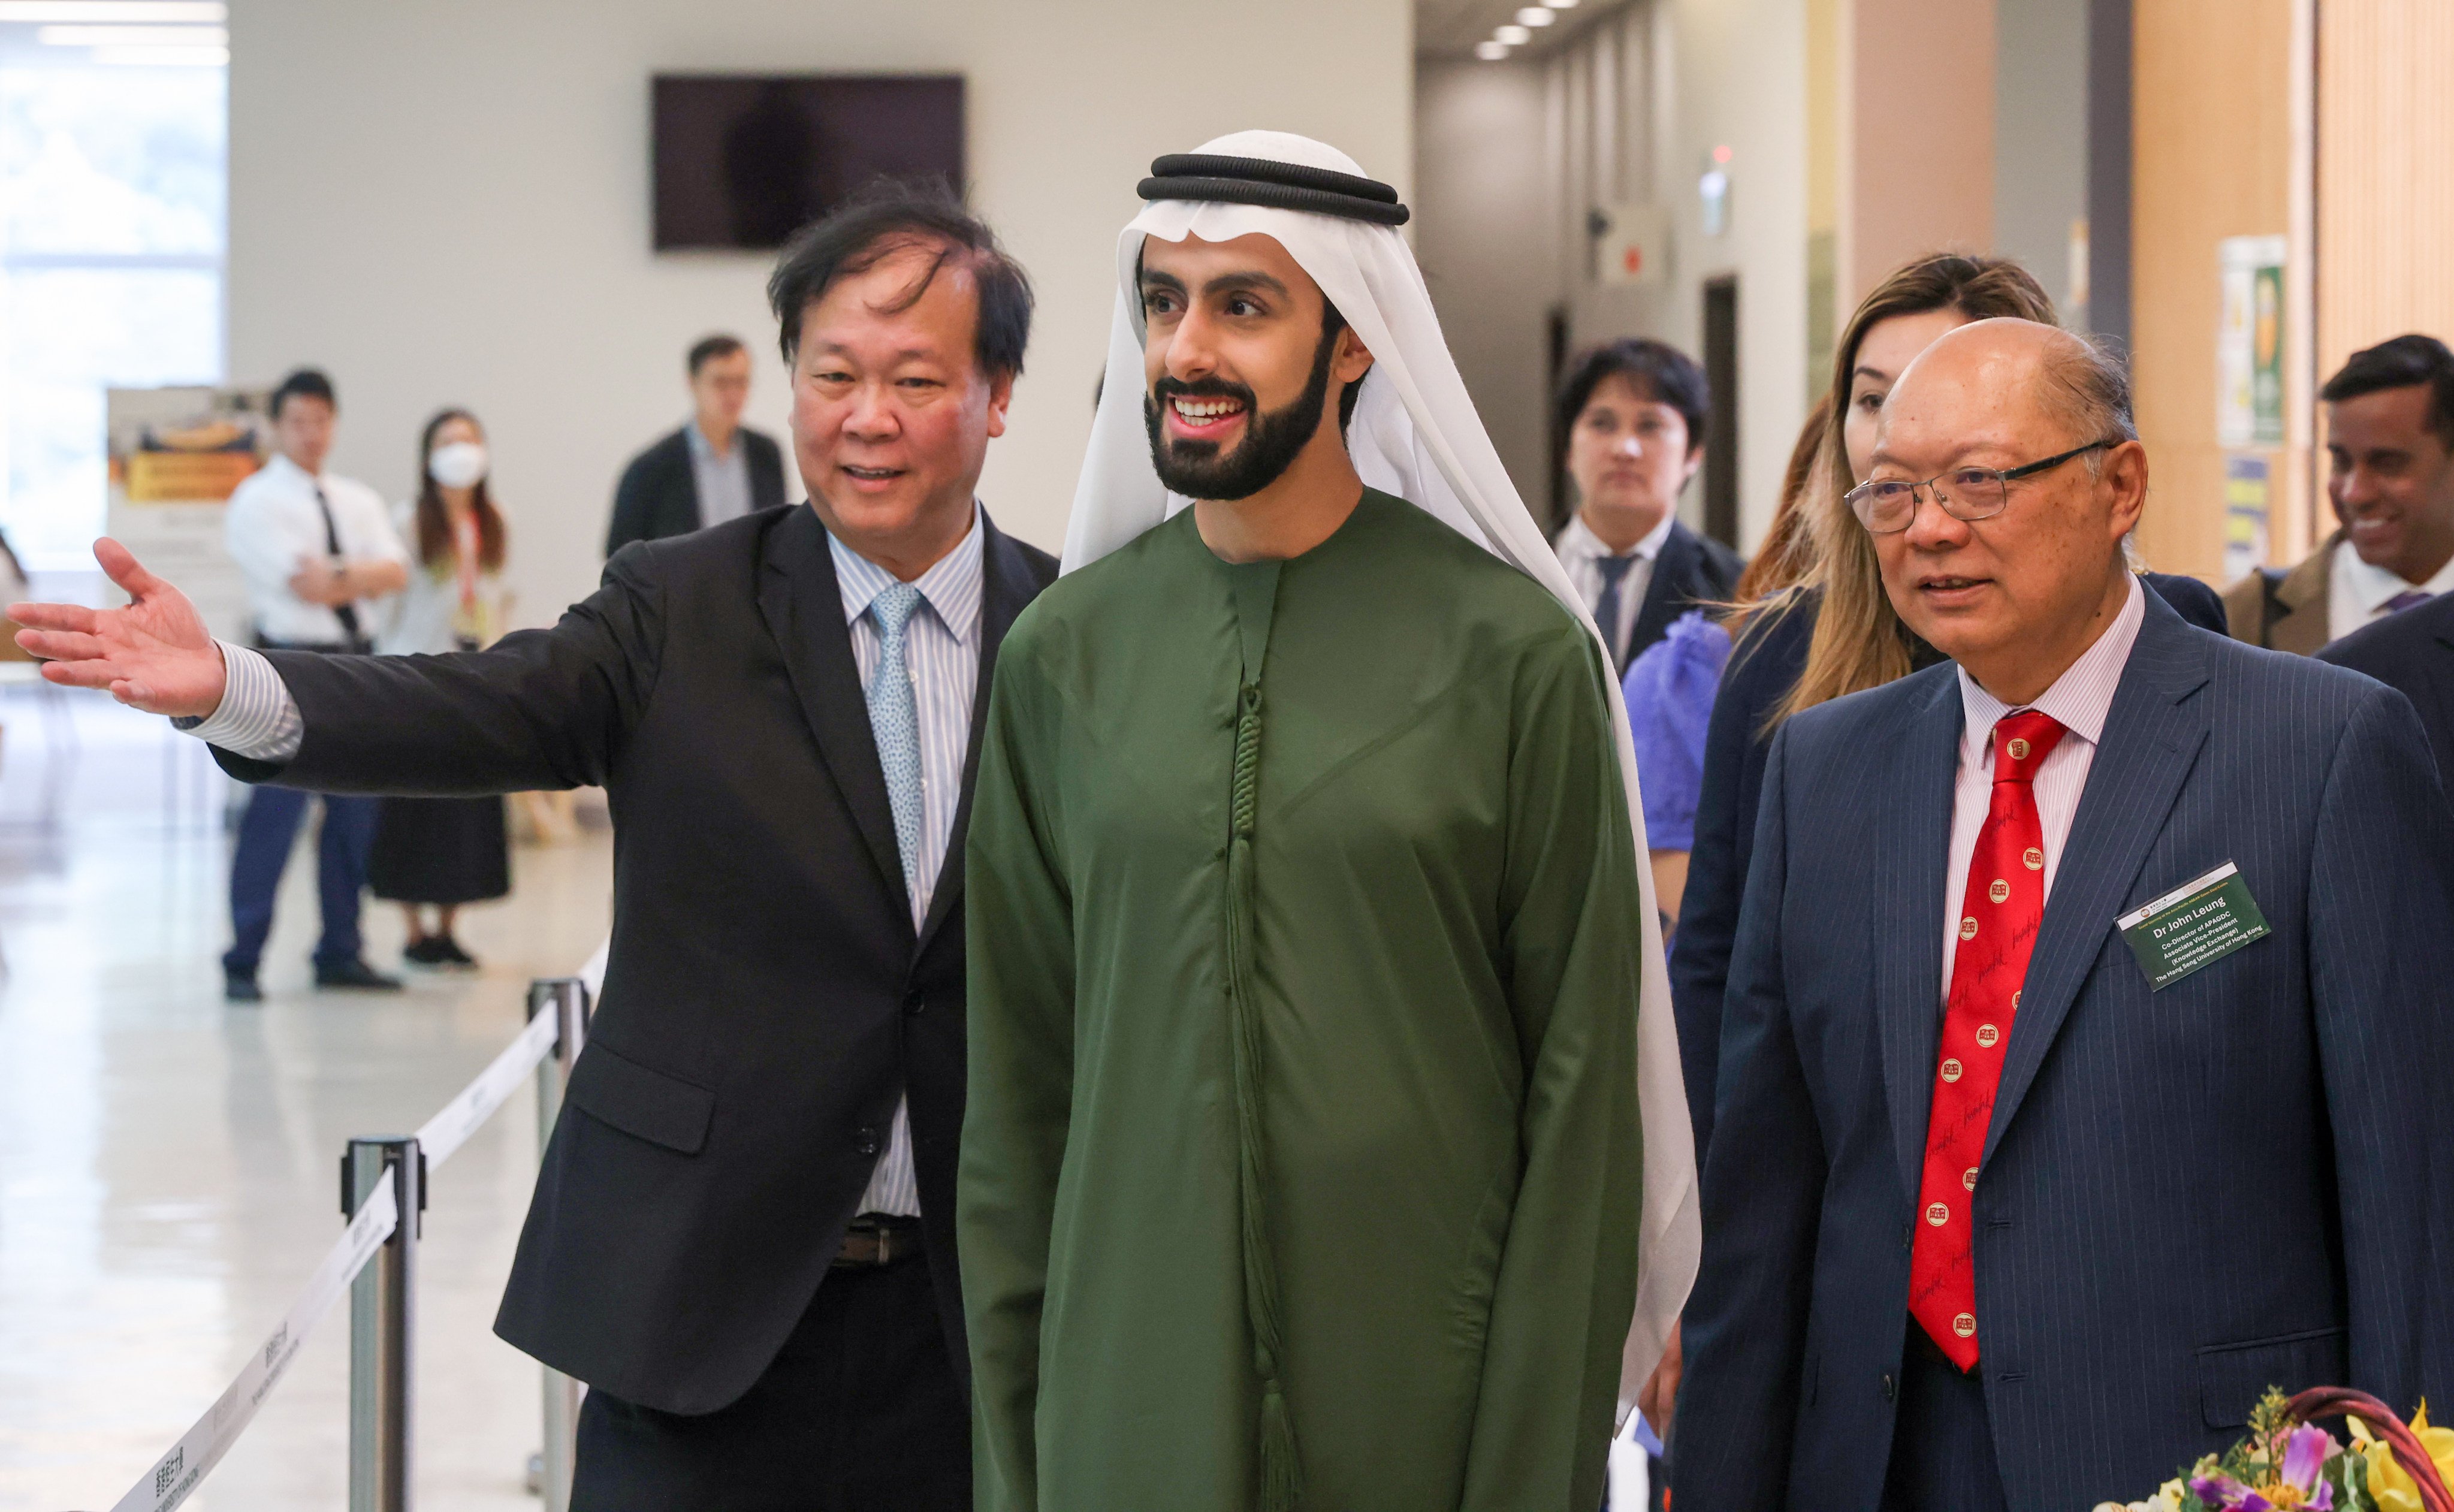 Sheikh Ali Al Maktoum (centre) and John Leung Wai-keung (right), associate vice-president for knowledge exchange at Hang Seng University, attend the opening ceremony of the Asia-Pacific Asean Green Deal Centre. Photo: Yik Yeung-man